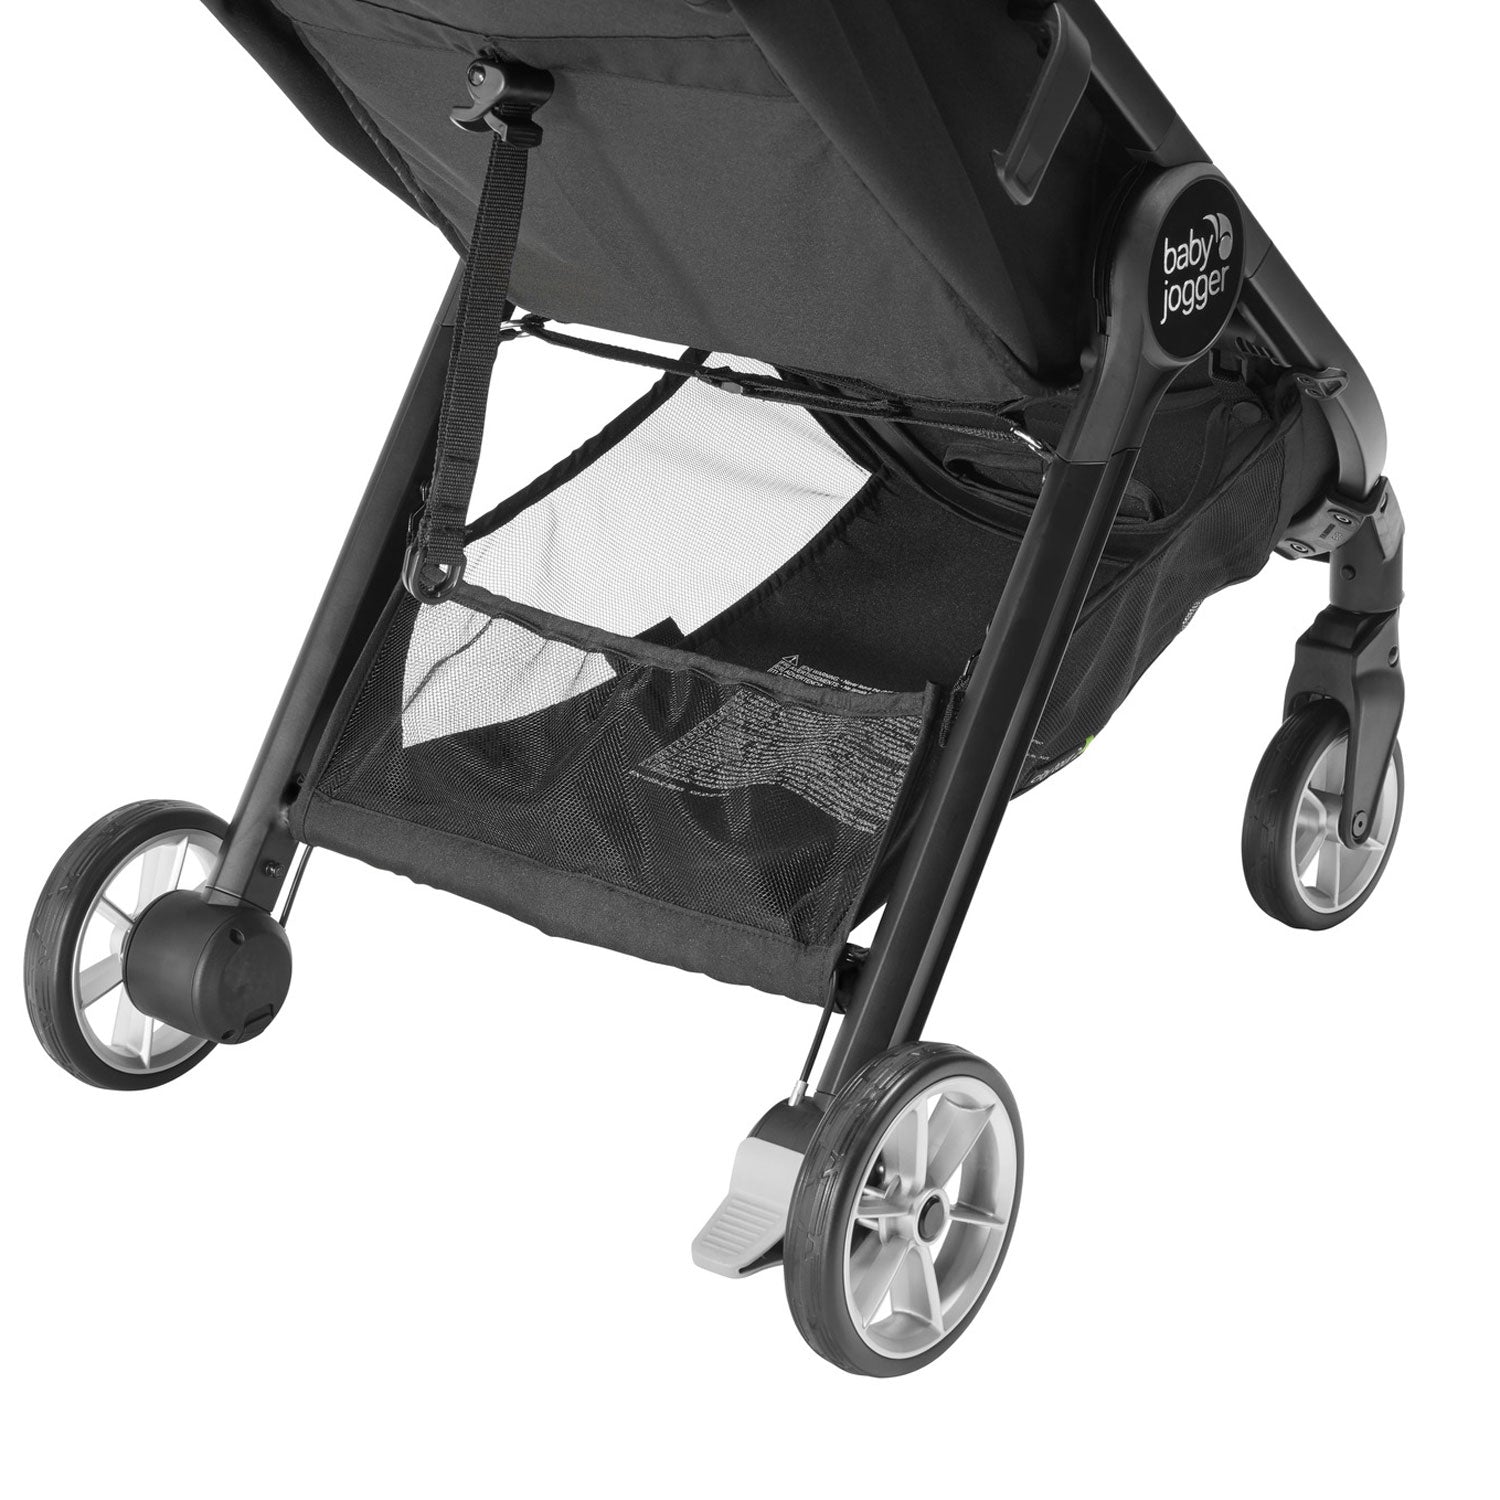 Afvigelse pause Gentage sig Baby Jogger City Tour 2 Single Stroller | The Baby Cubby